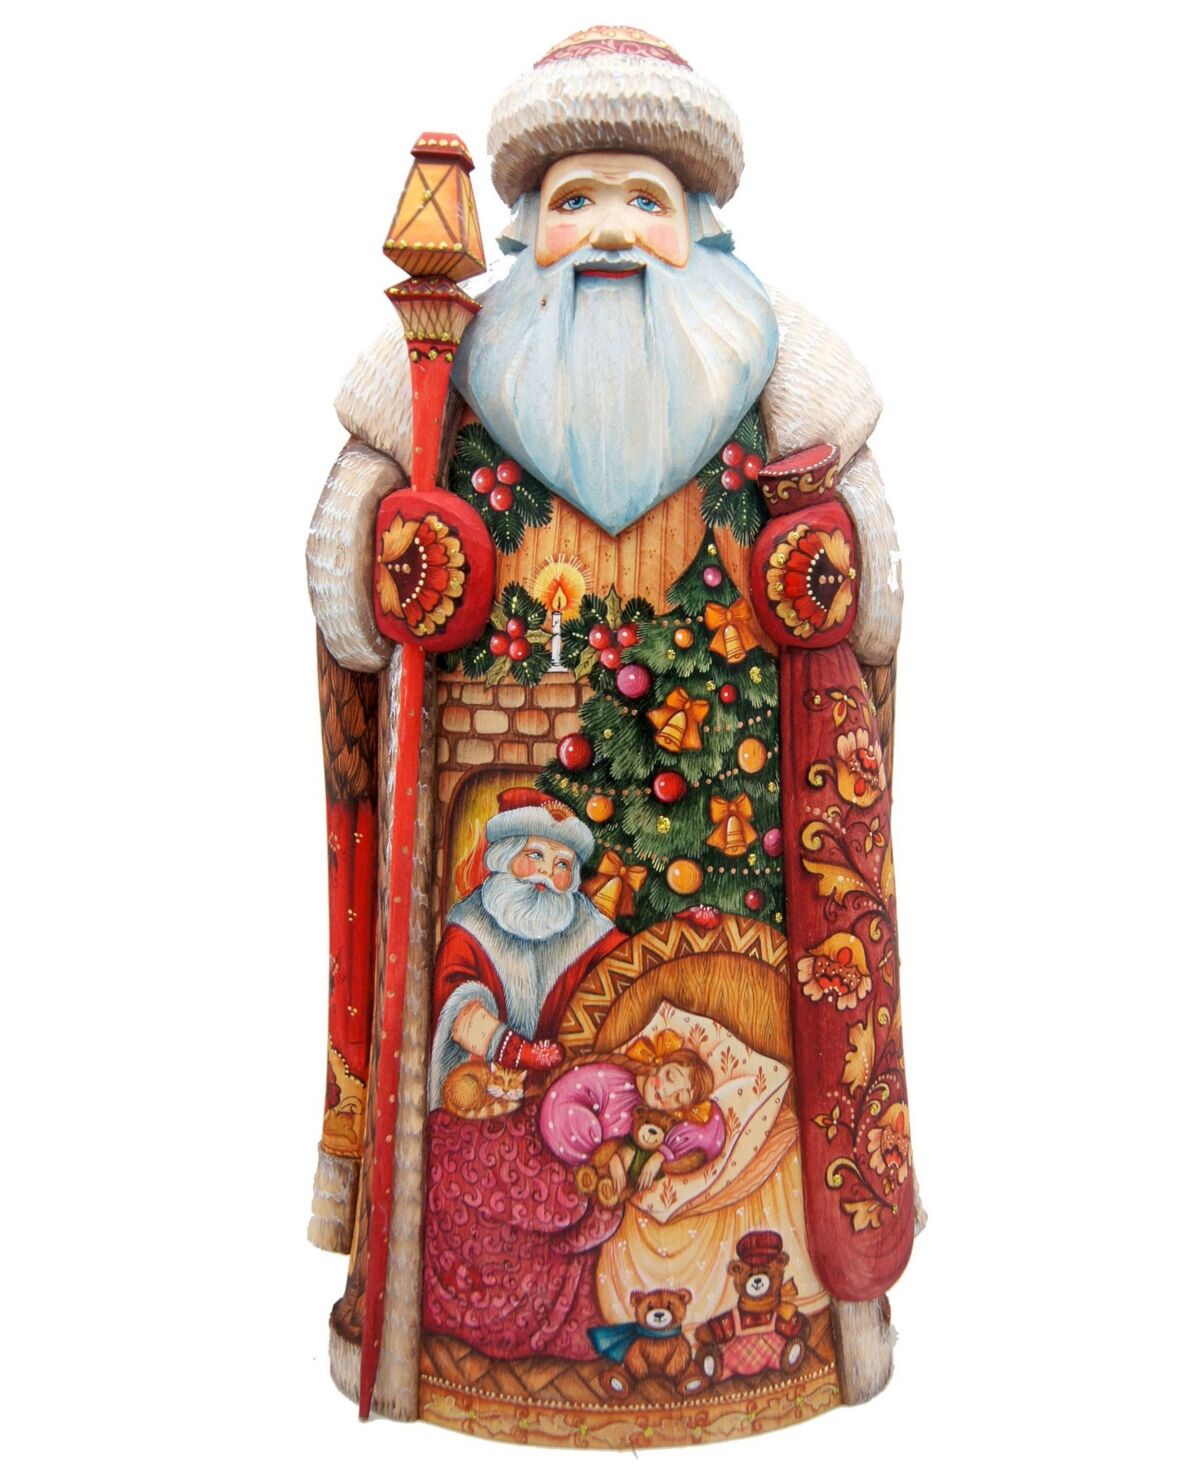 G.DeBrekht Woodcarved and Hand Painted Night Before Christmas Santa Claus Figurine - Multi